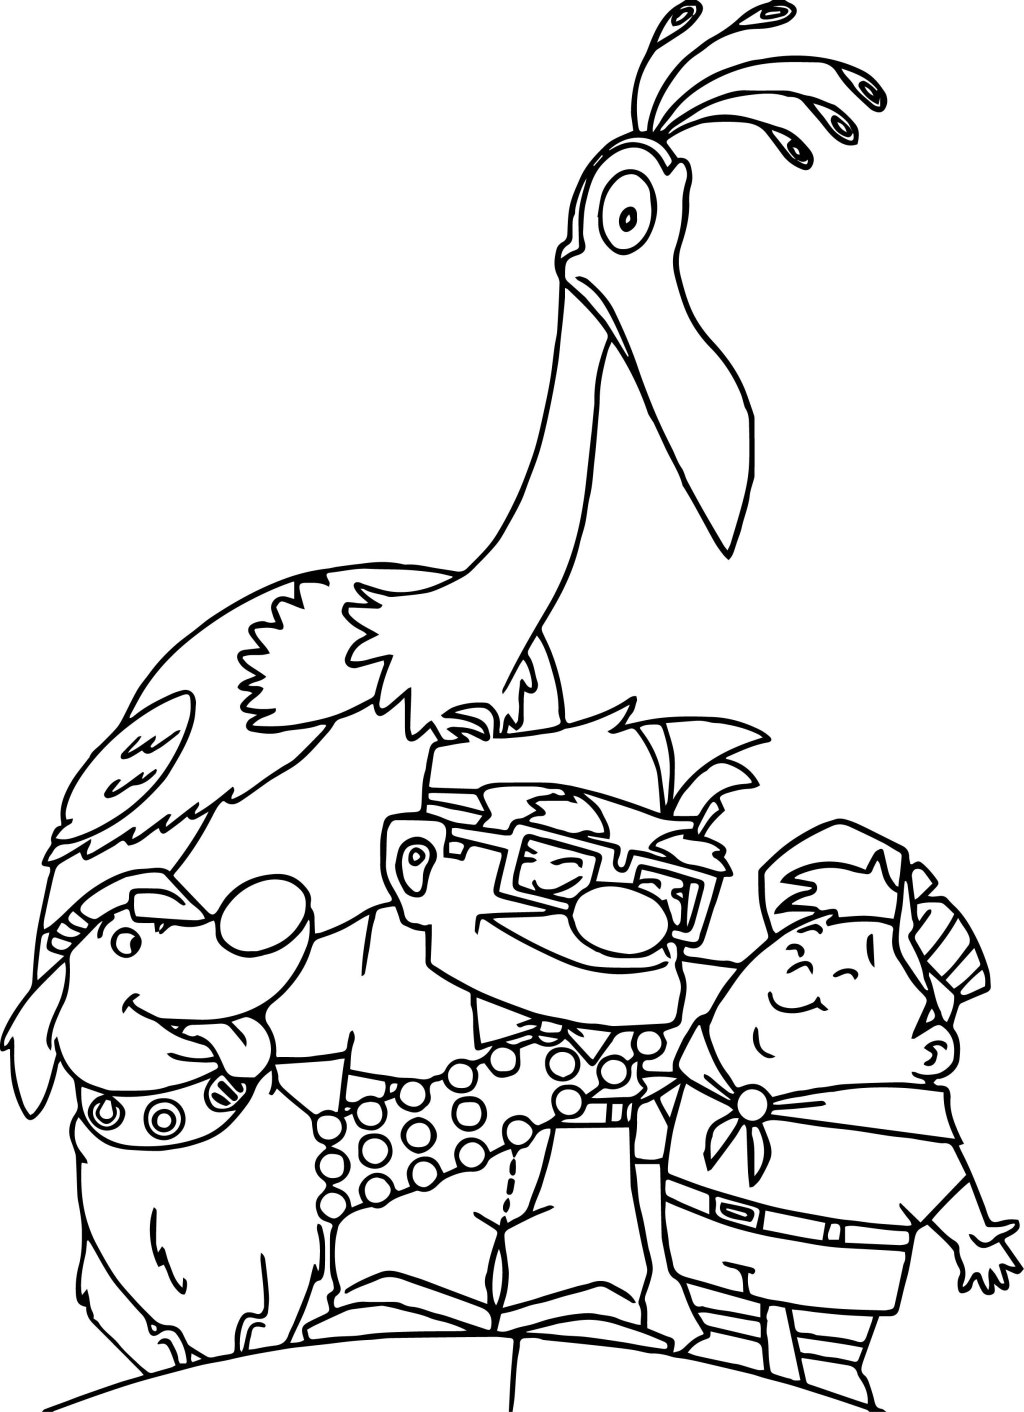 Picture of: Disney Pixar Up Coloring Pages – Wecoloringpage